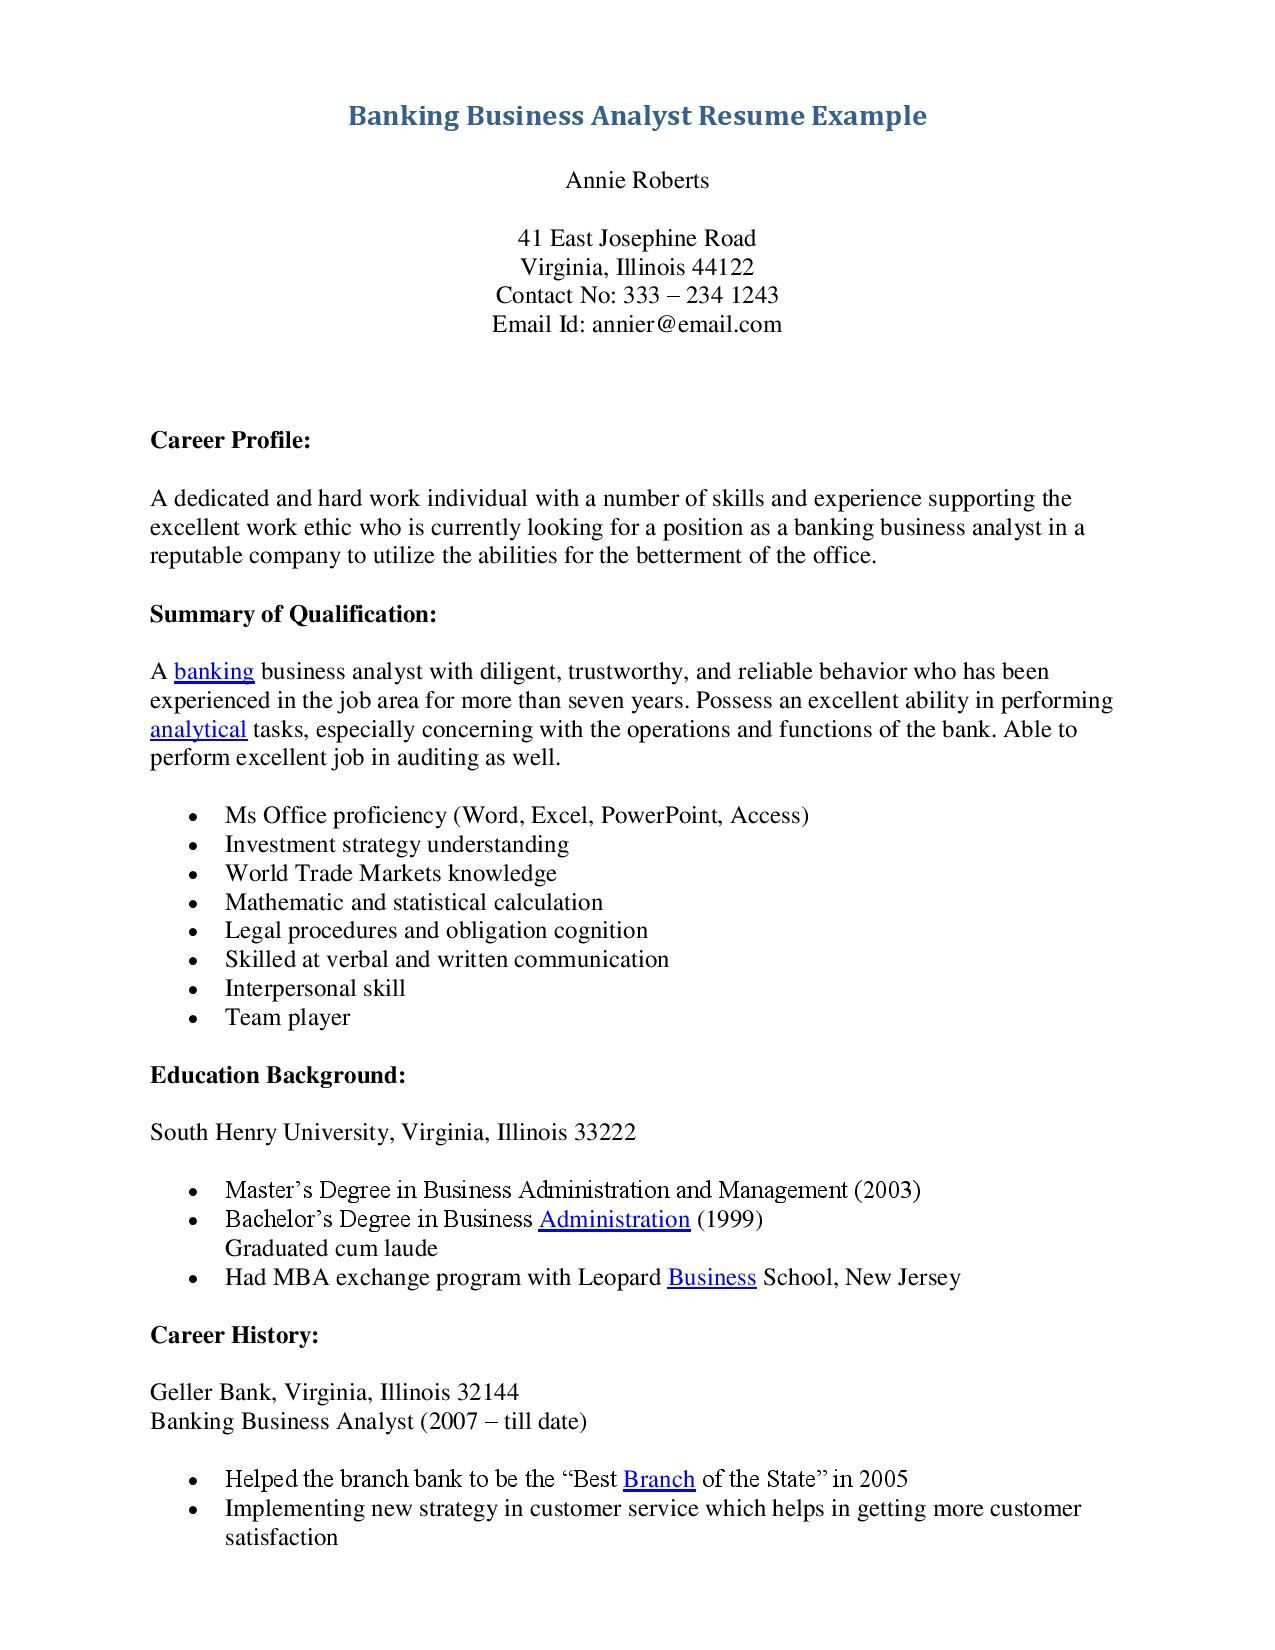 Sample Resume for Business Analyst In Banking Domain Digital Banking Business Analyst Resume October 2021